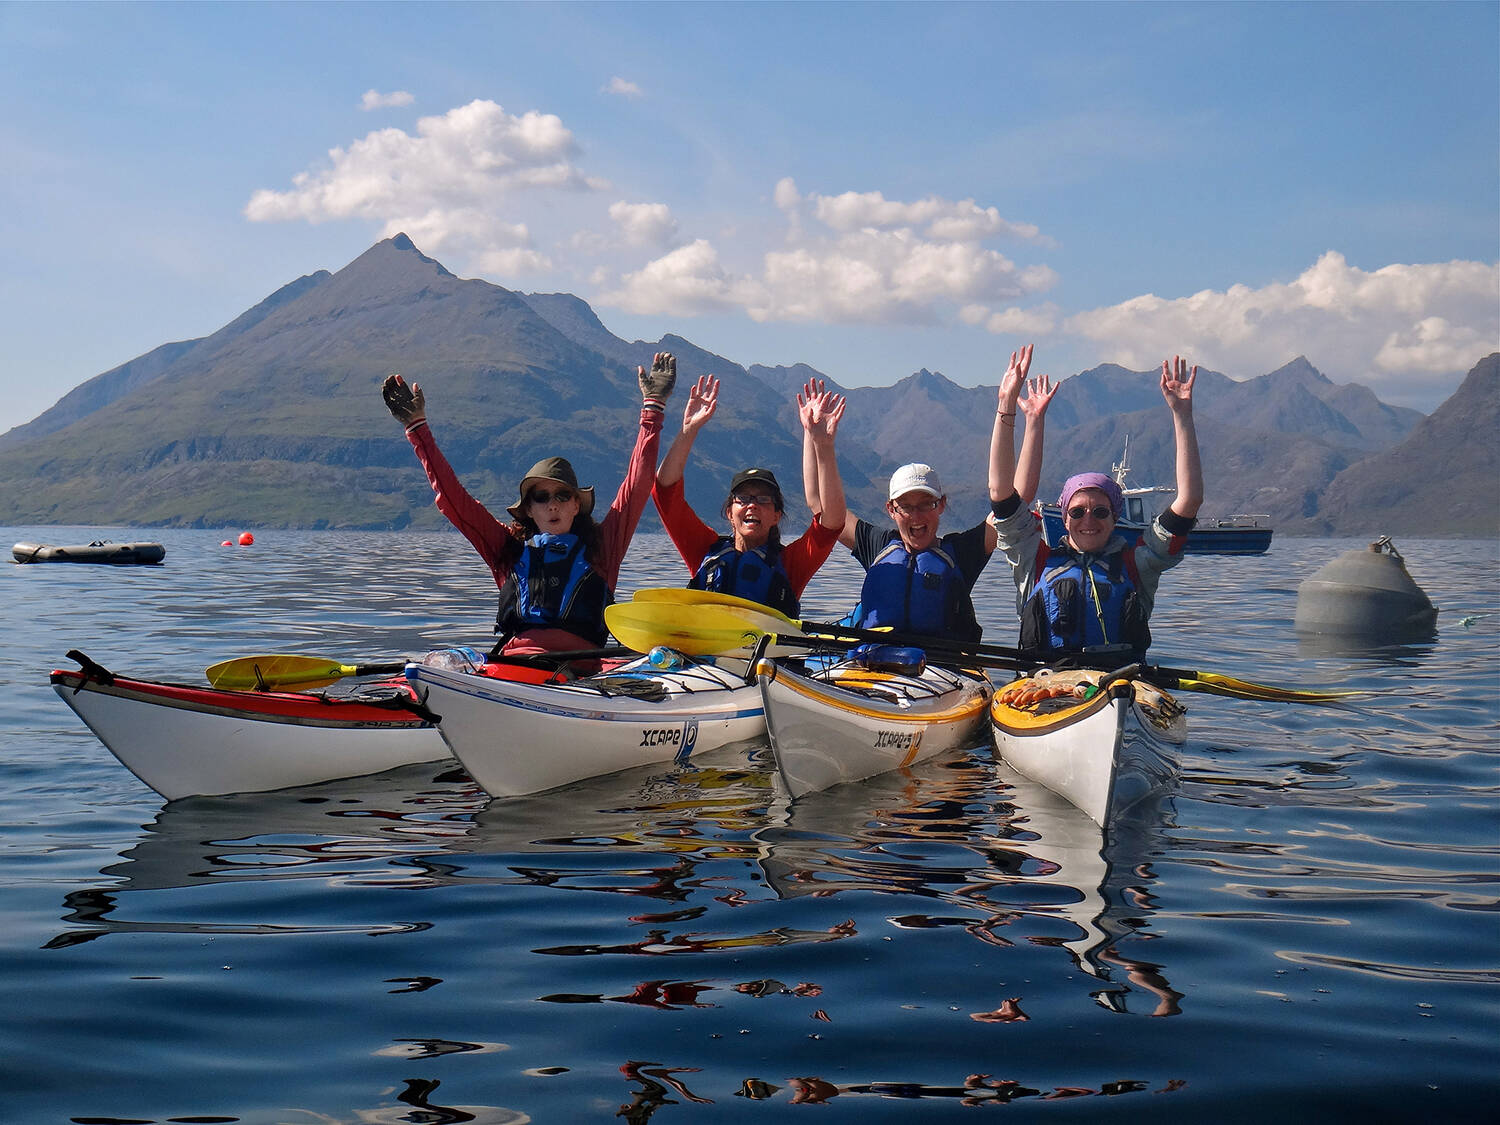 Four people in a row in kayaks raise their hands in the air. The water is very still and blue. Tall mountains rise behind them in the distance.